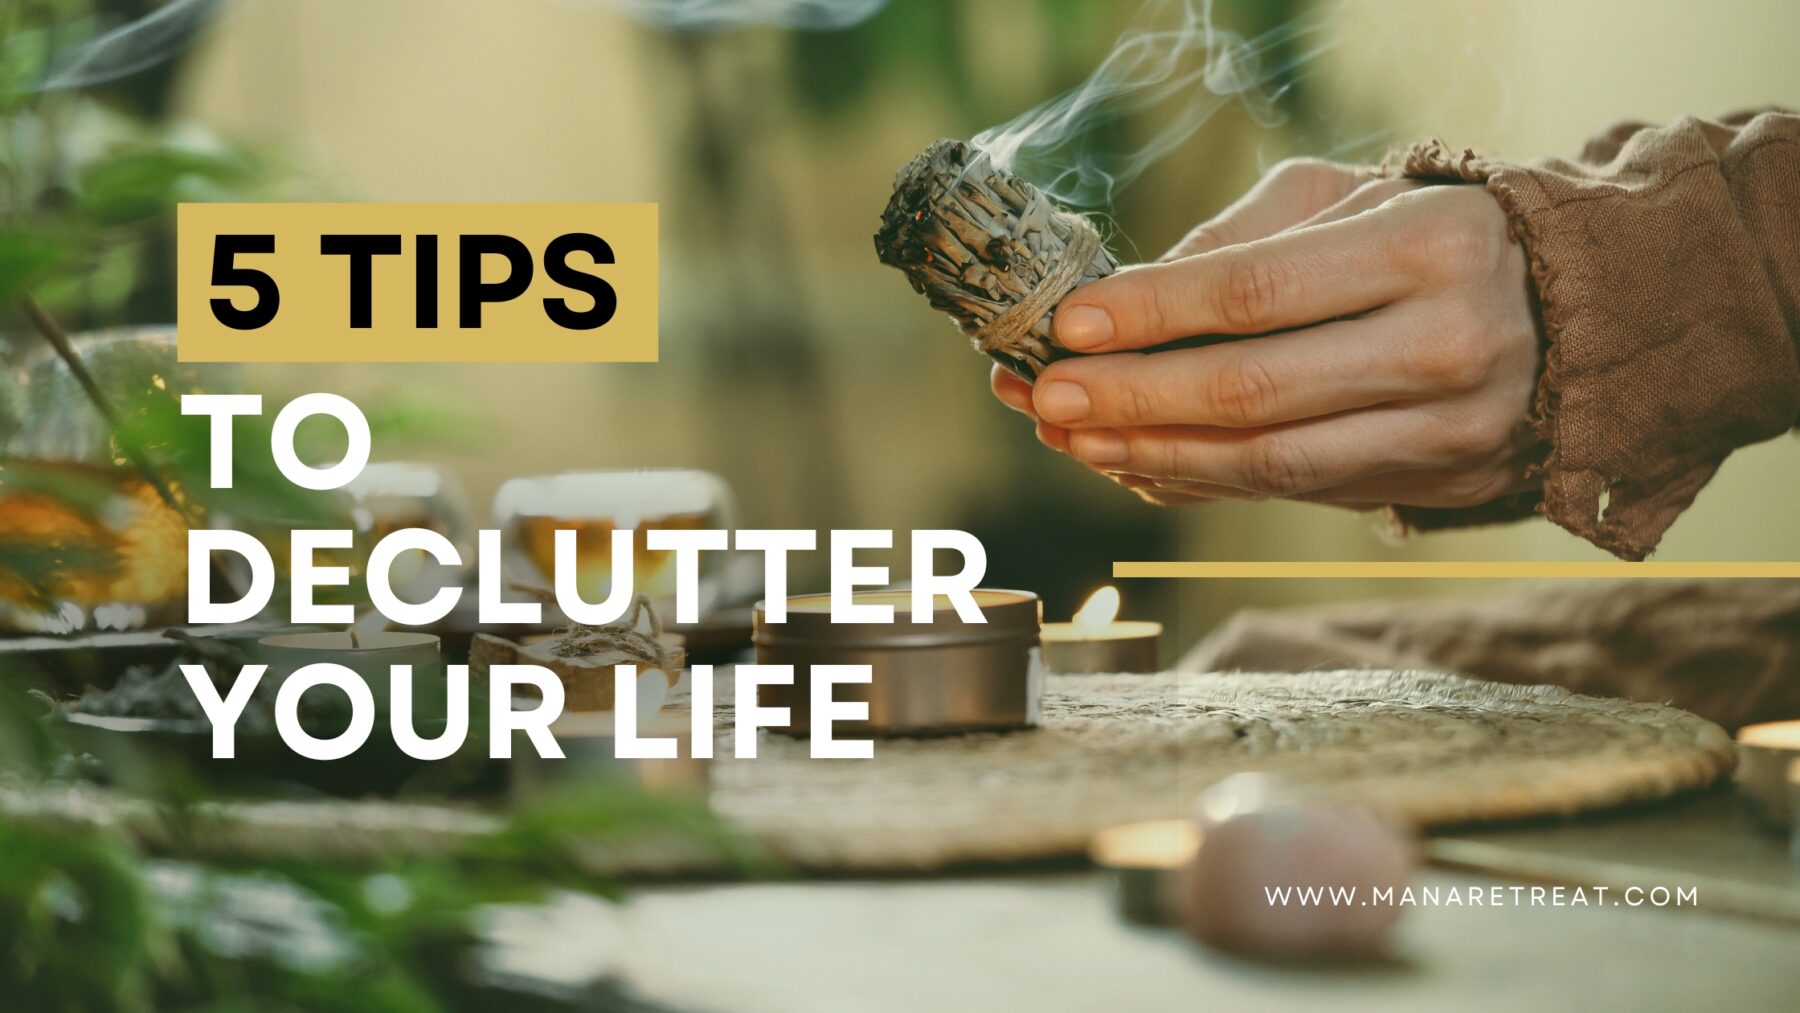 5 Tips to Declutter Your Life and Help You Remember That You Are Enough, Just As You Are